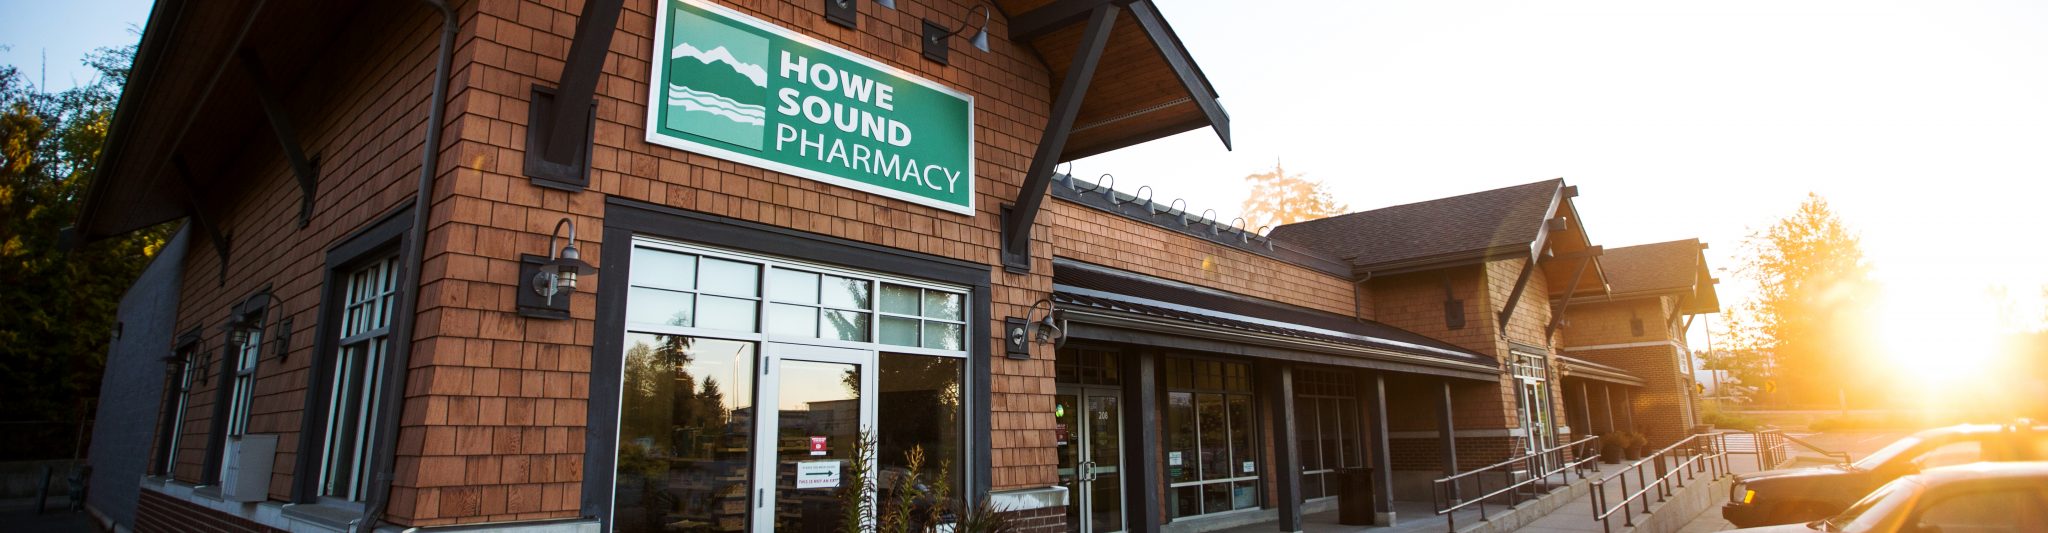 Howe Sound Pharmacy is open for you and your health